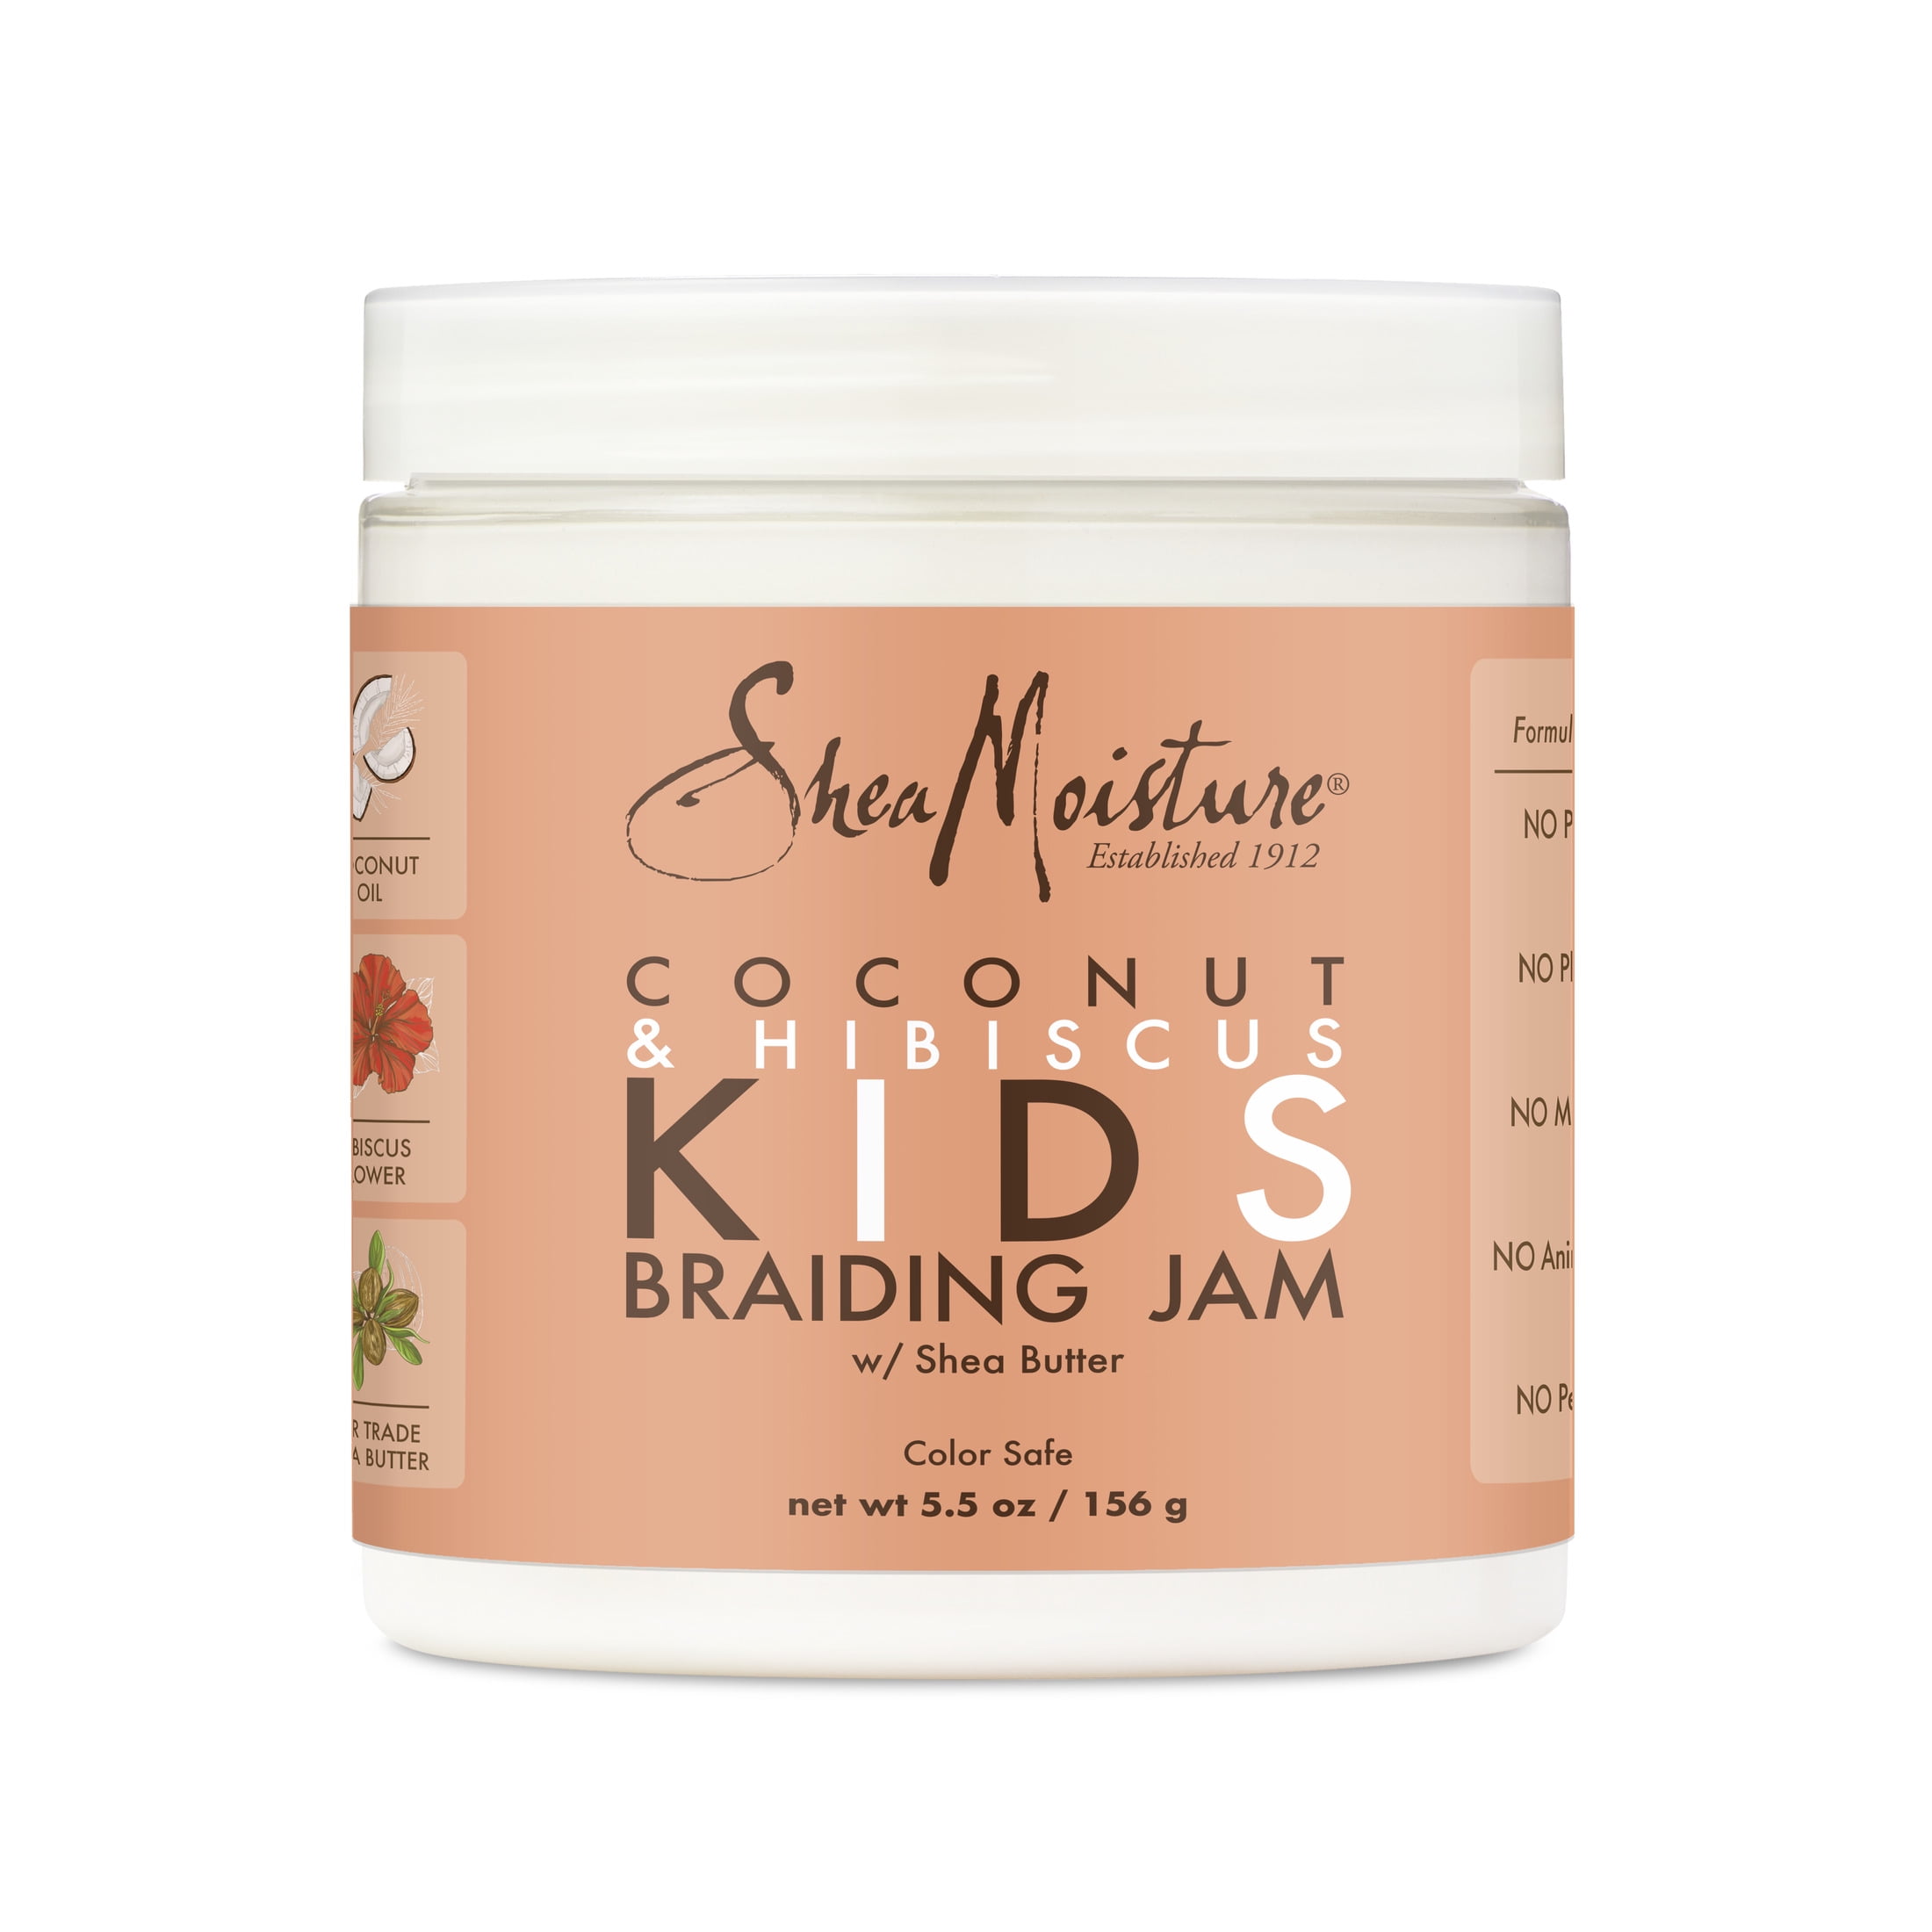 Braiding Gel That Works Better Than Jam and Can Hold Hair for up to 3  Months. MUST TRY 